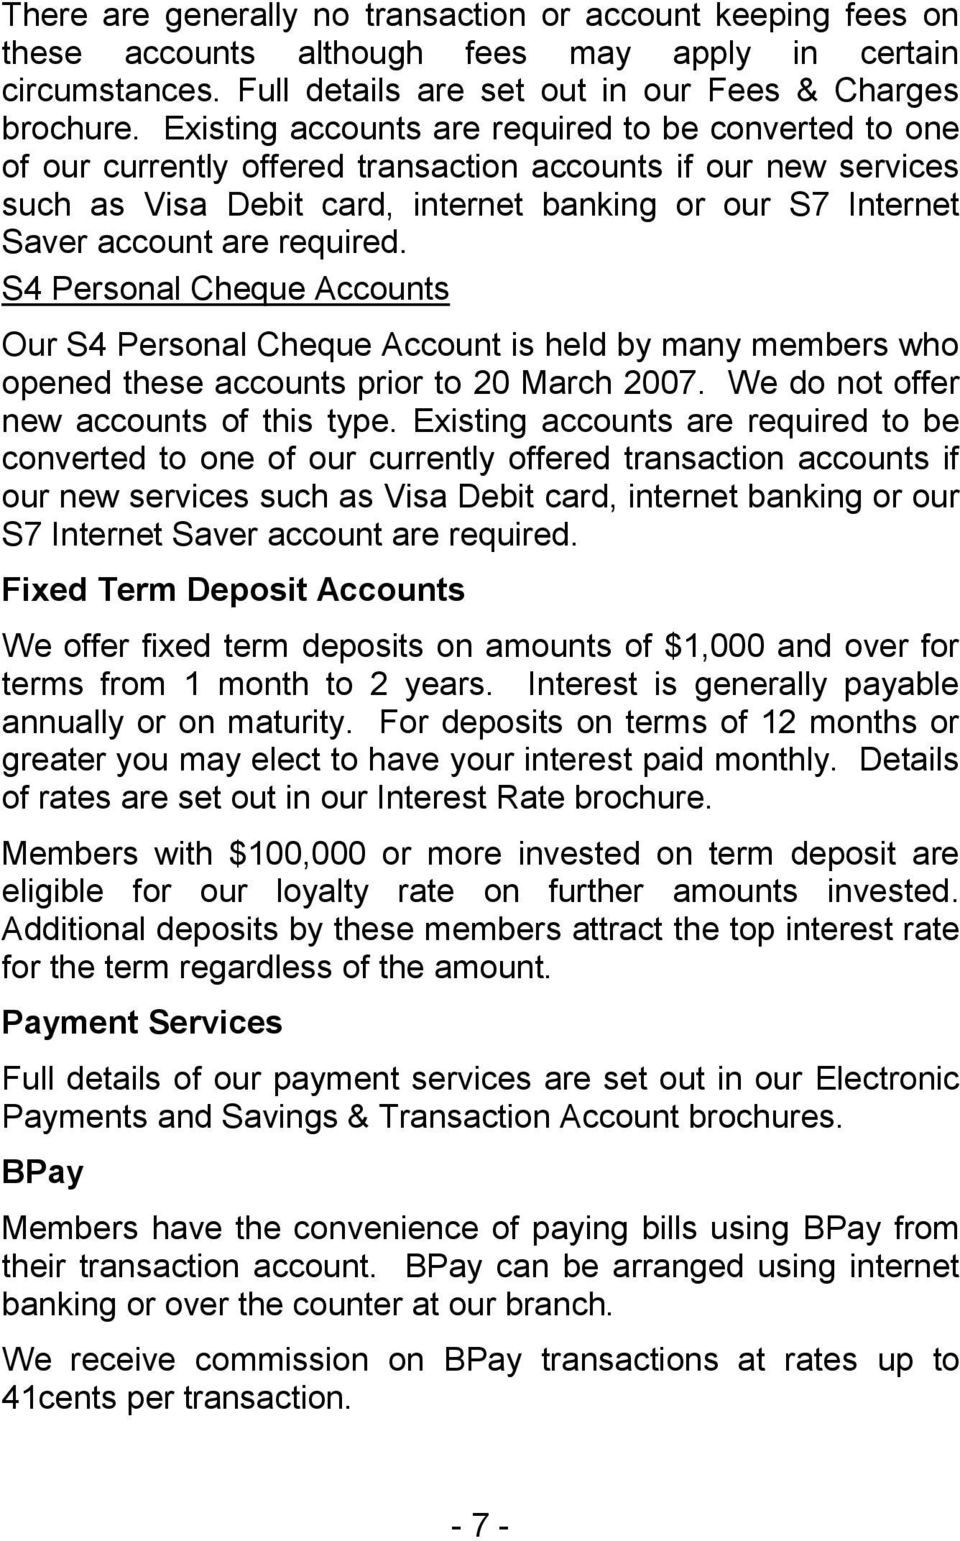 required. S4 Personal Cheque Accounts Our S4 Personal Cheque Account is held by many members who opened these accounts prior to 20 March 2007. We do not offer new accounts of this type.  required.